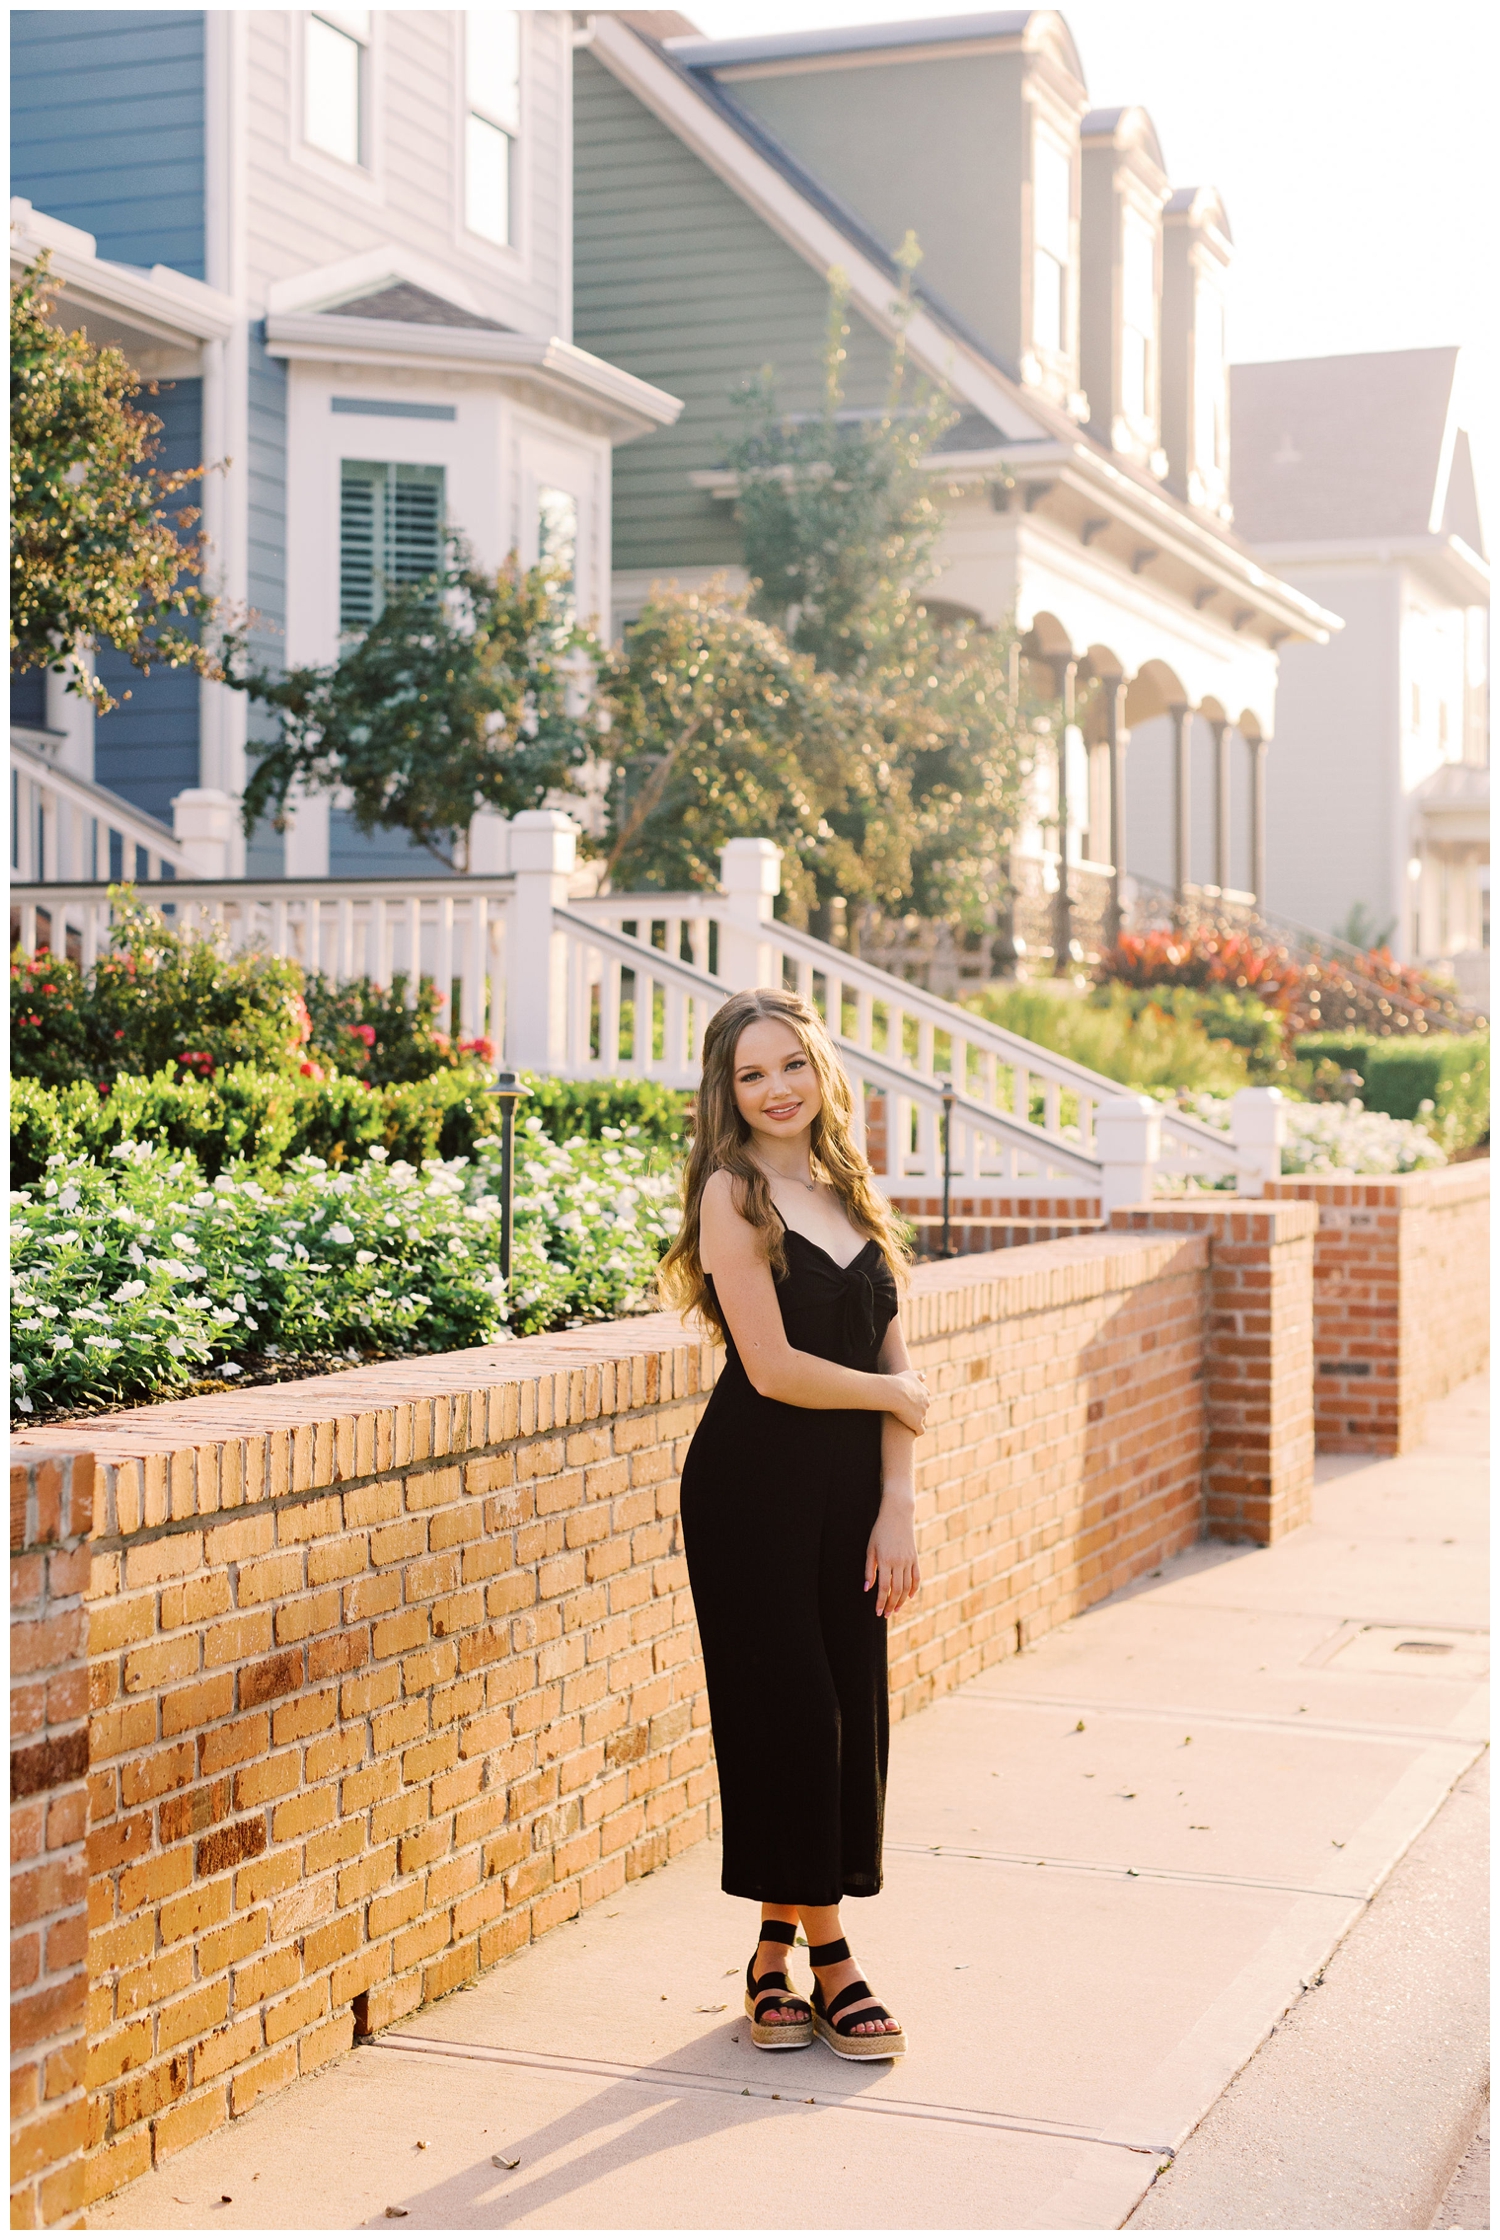 Galveston Beach senior session with girl in black jumpsuit standing in front of sidewalk